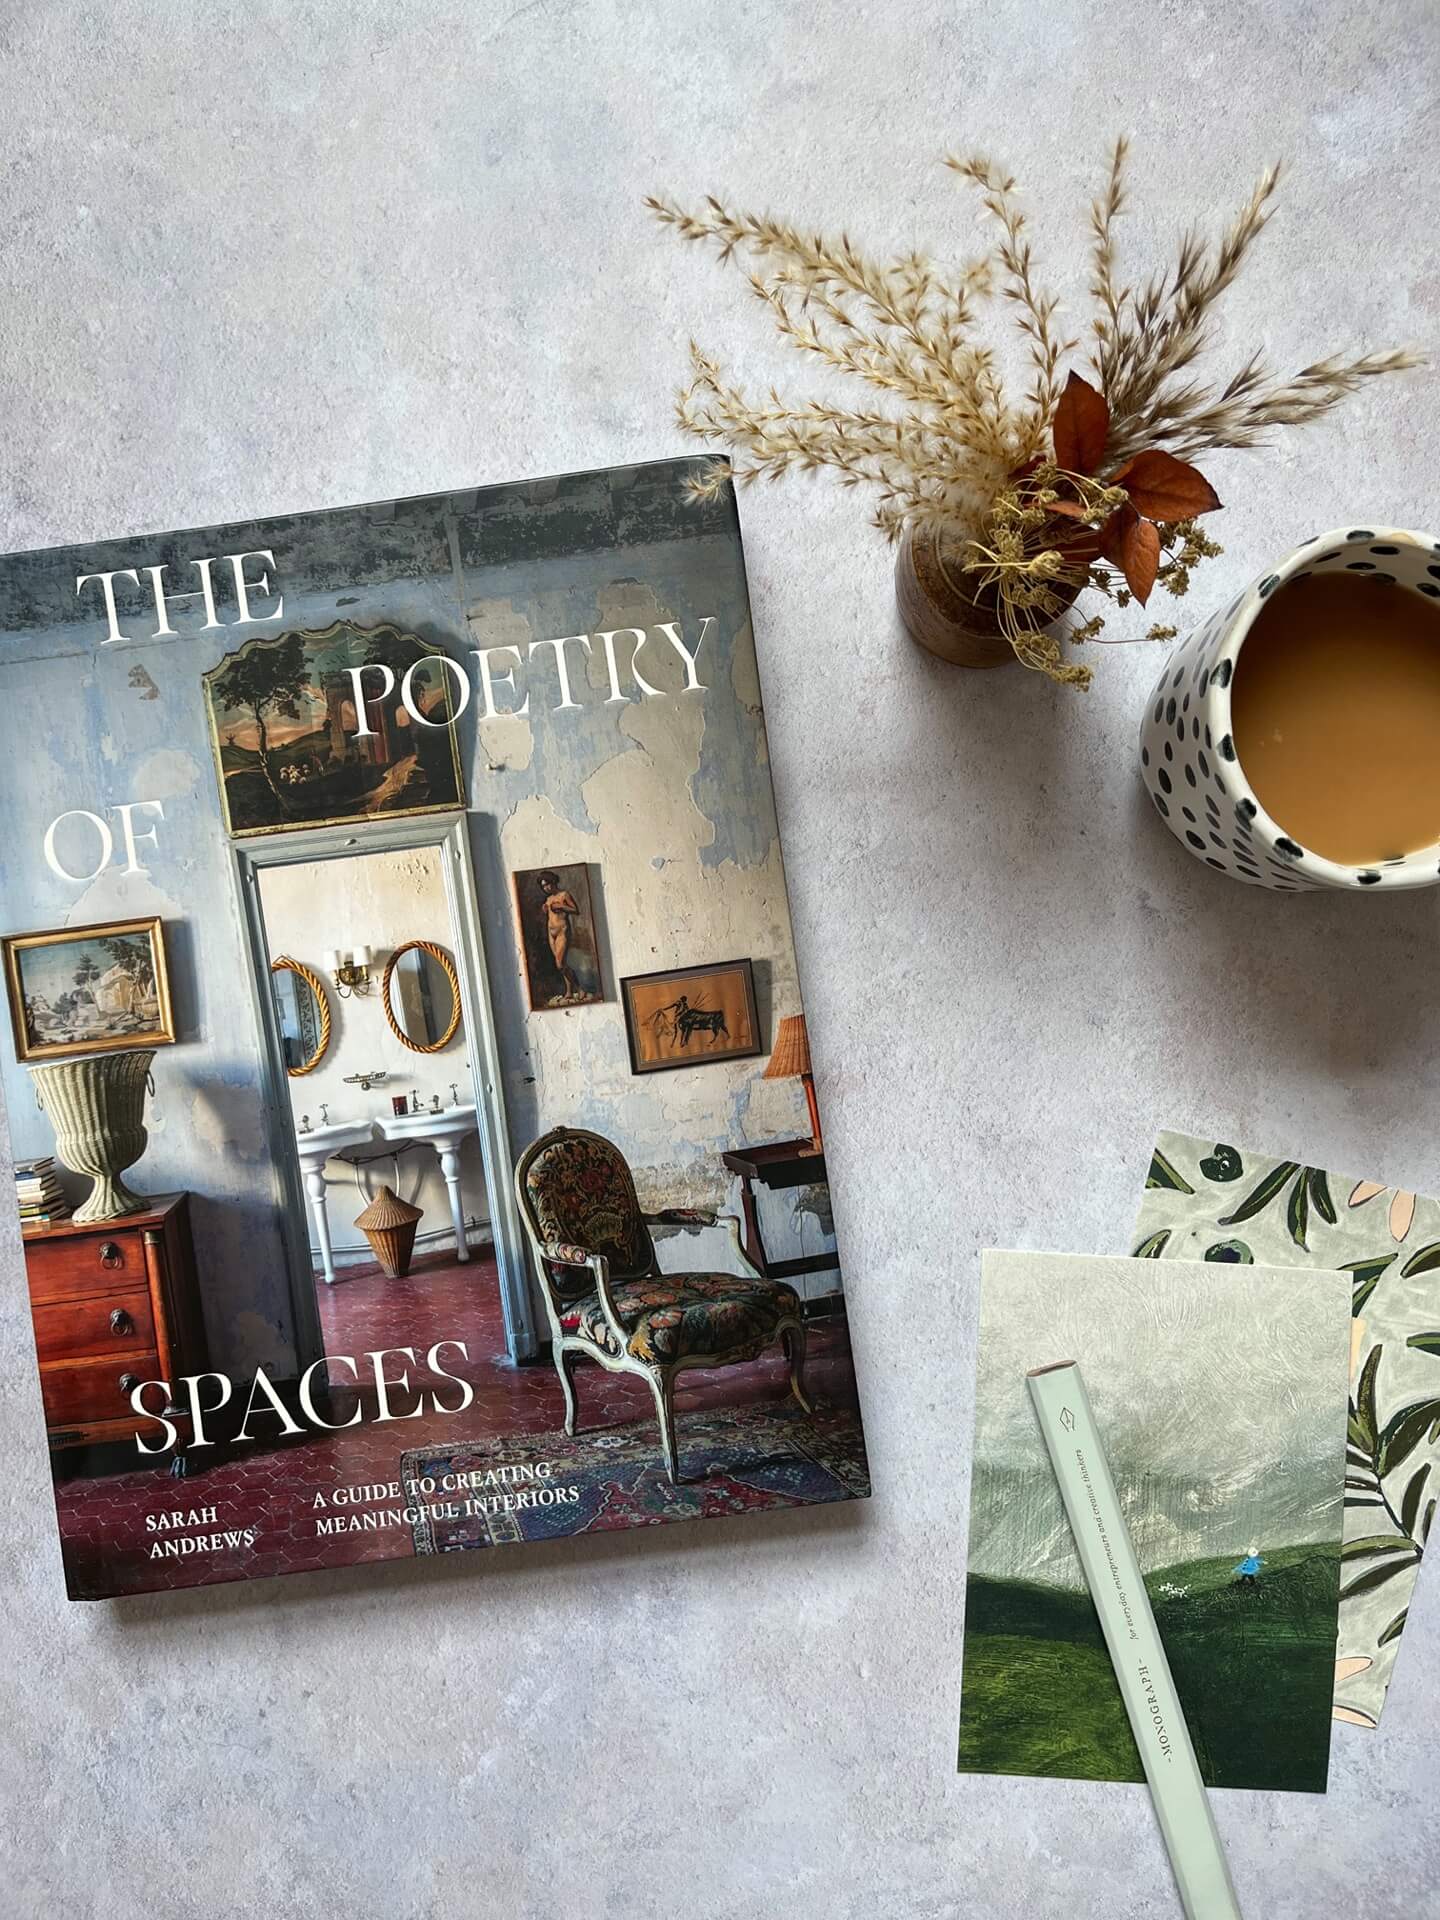 The Poetry of Spaces book by Sarah Andrews